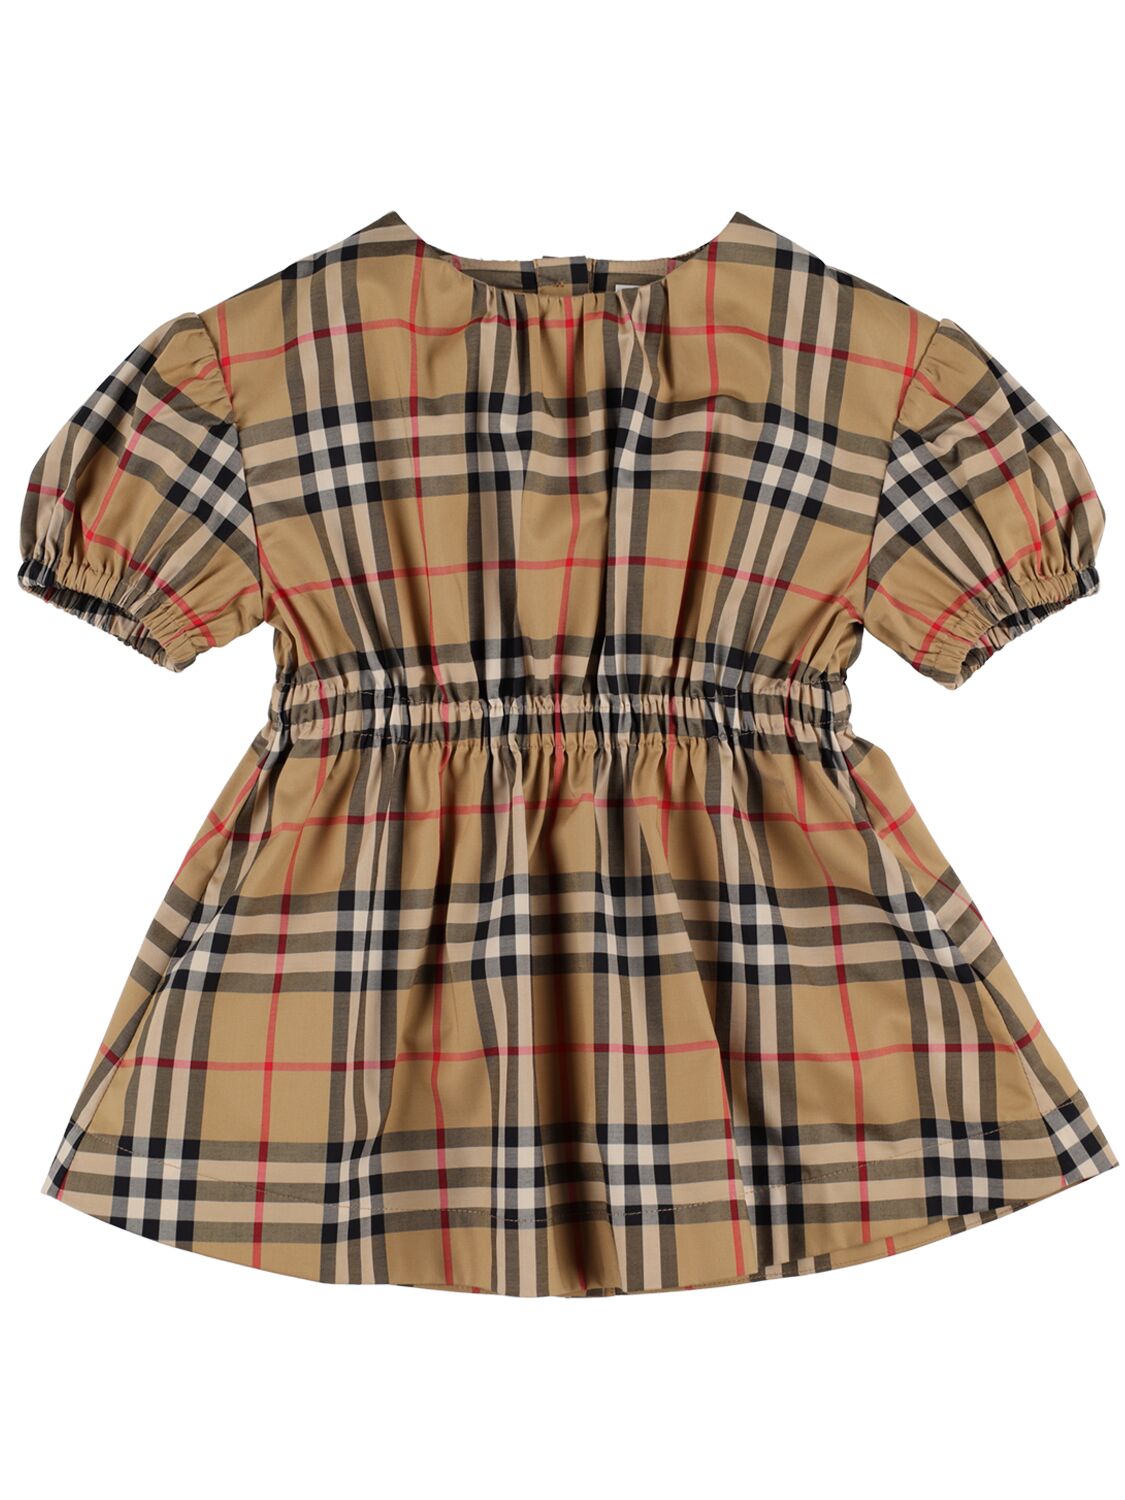 Burberry Kids' Check Printed Cotton Blend Dress In Beige